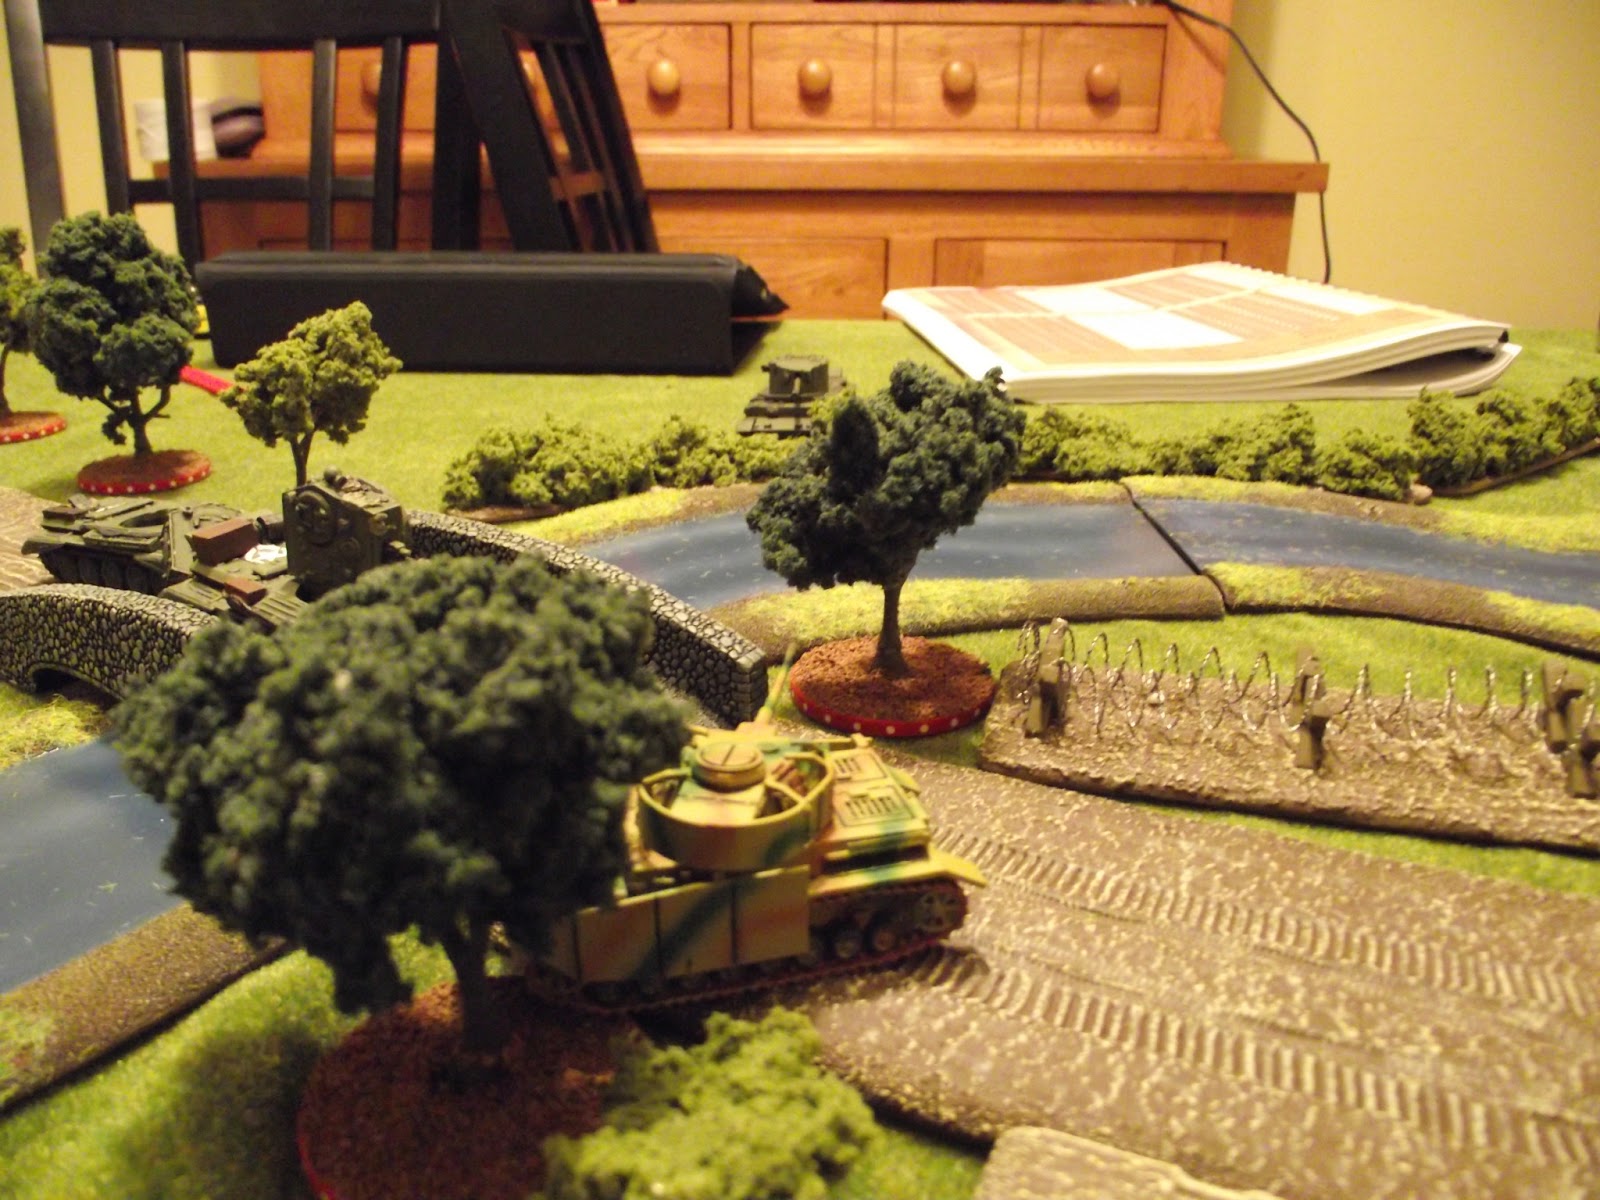  The British Challenger tries to end the game by shooting the Panzer IV from the side, but somehow only manages to knock its track off. The return fire forces the Challenger to admit defeat and move away. It beat my defence dice by one, and although 